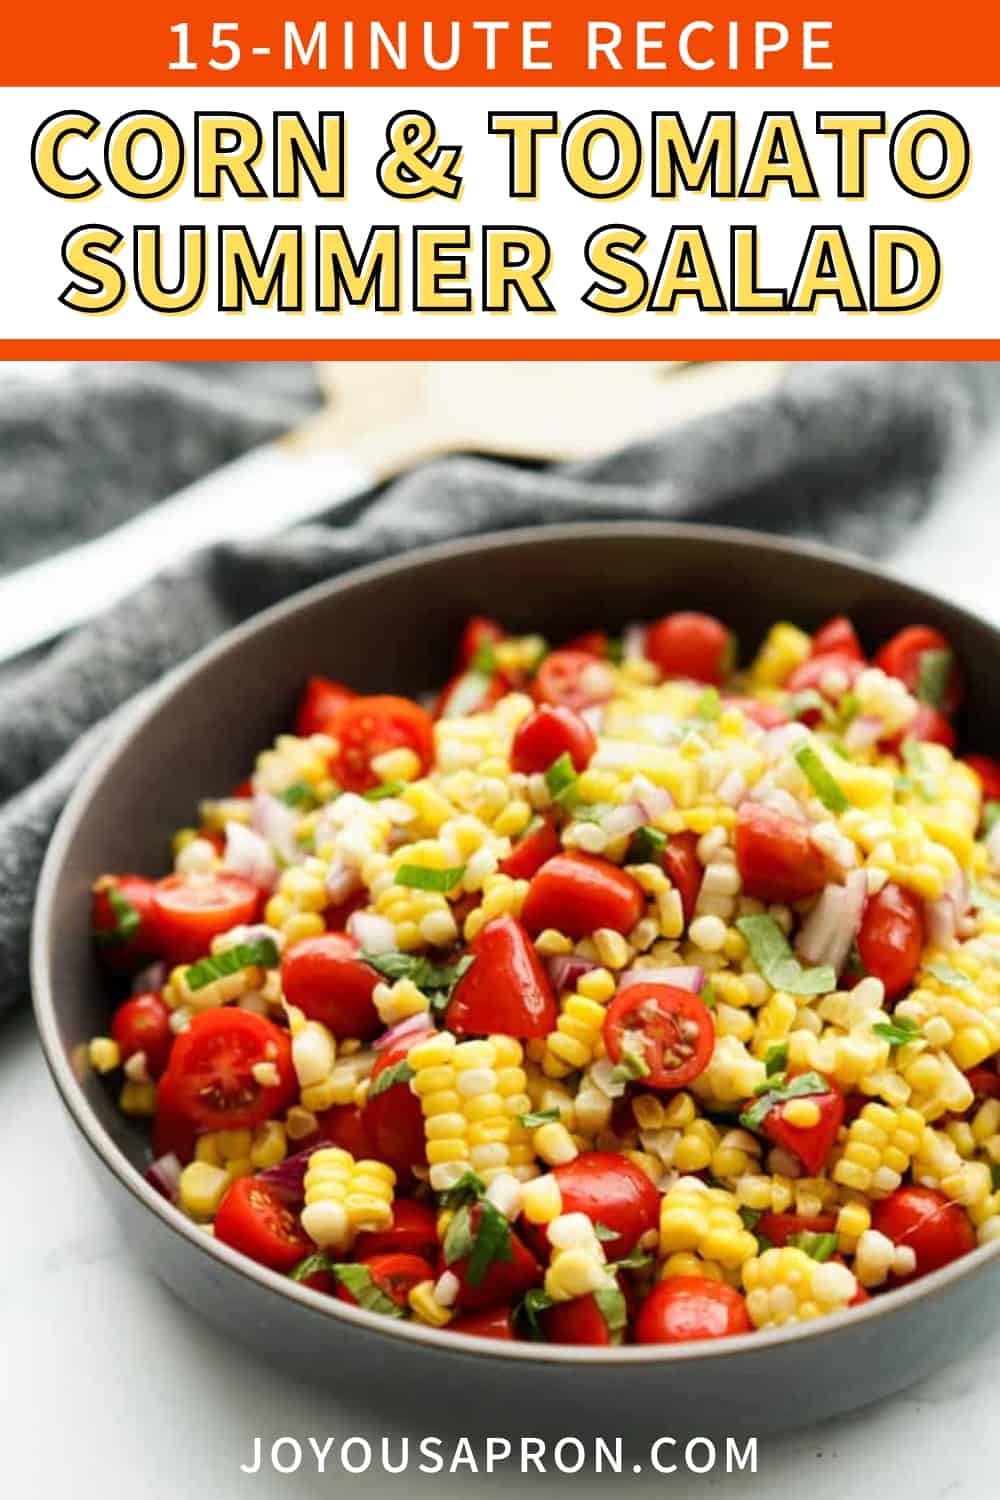 Corn and Tomato Salad - Fresh corn and cherry tomatoes combined with red onions and fresh basil, and tossed in a tangy red wine vinegar dressing. This healthy, easy and delicious side dish pairs perfectly with your favorite grilled meats and proteins for summer dinners and cookouts. via @joyousapron